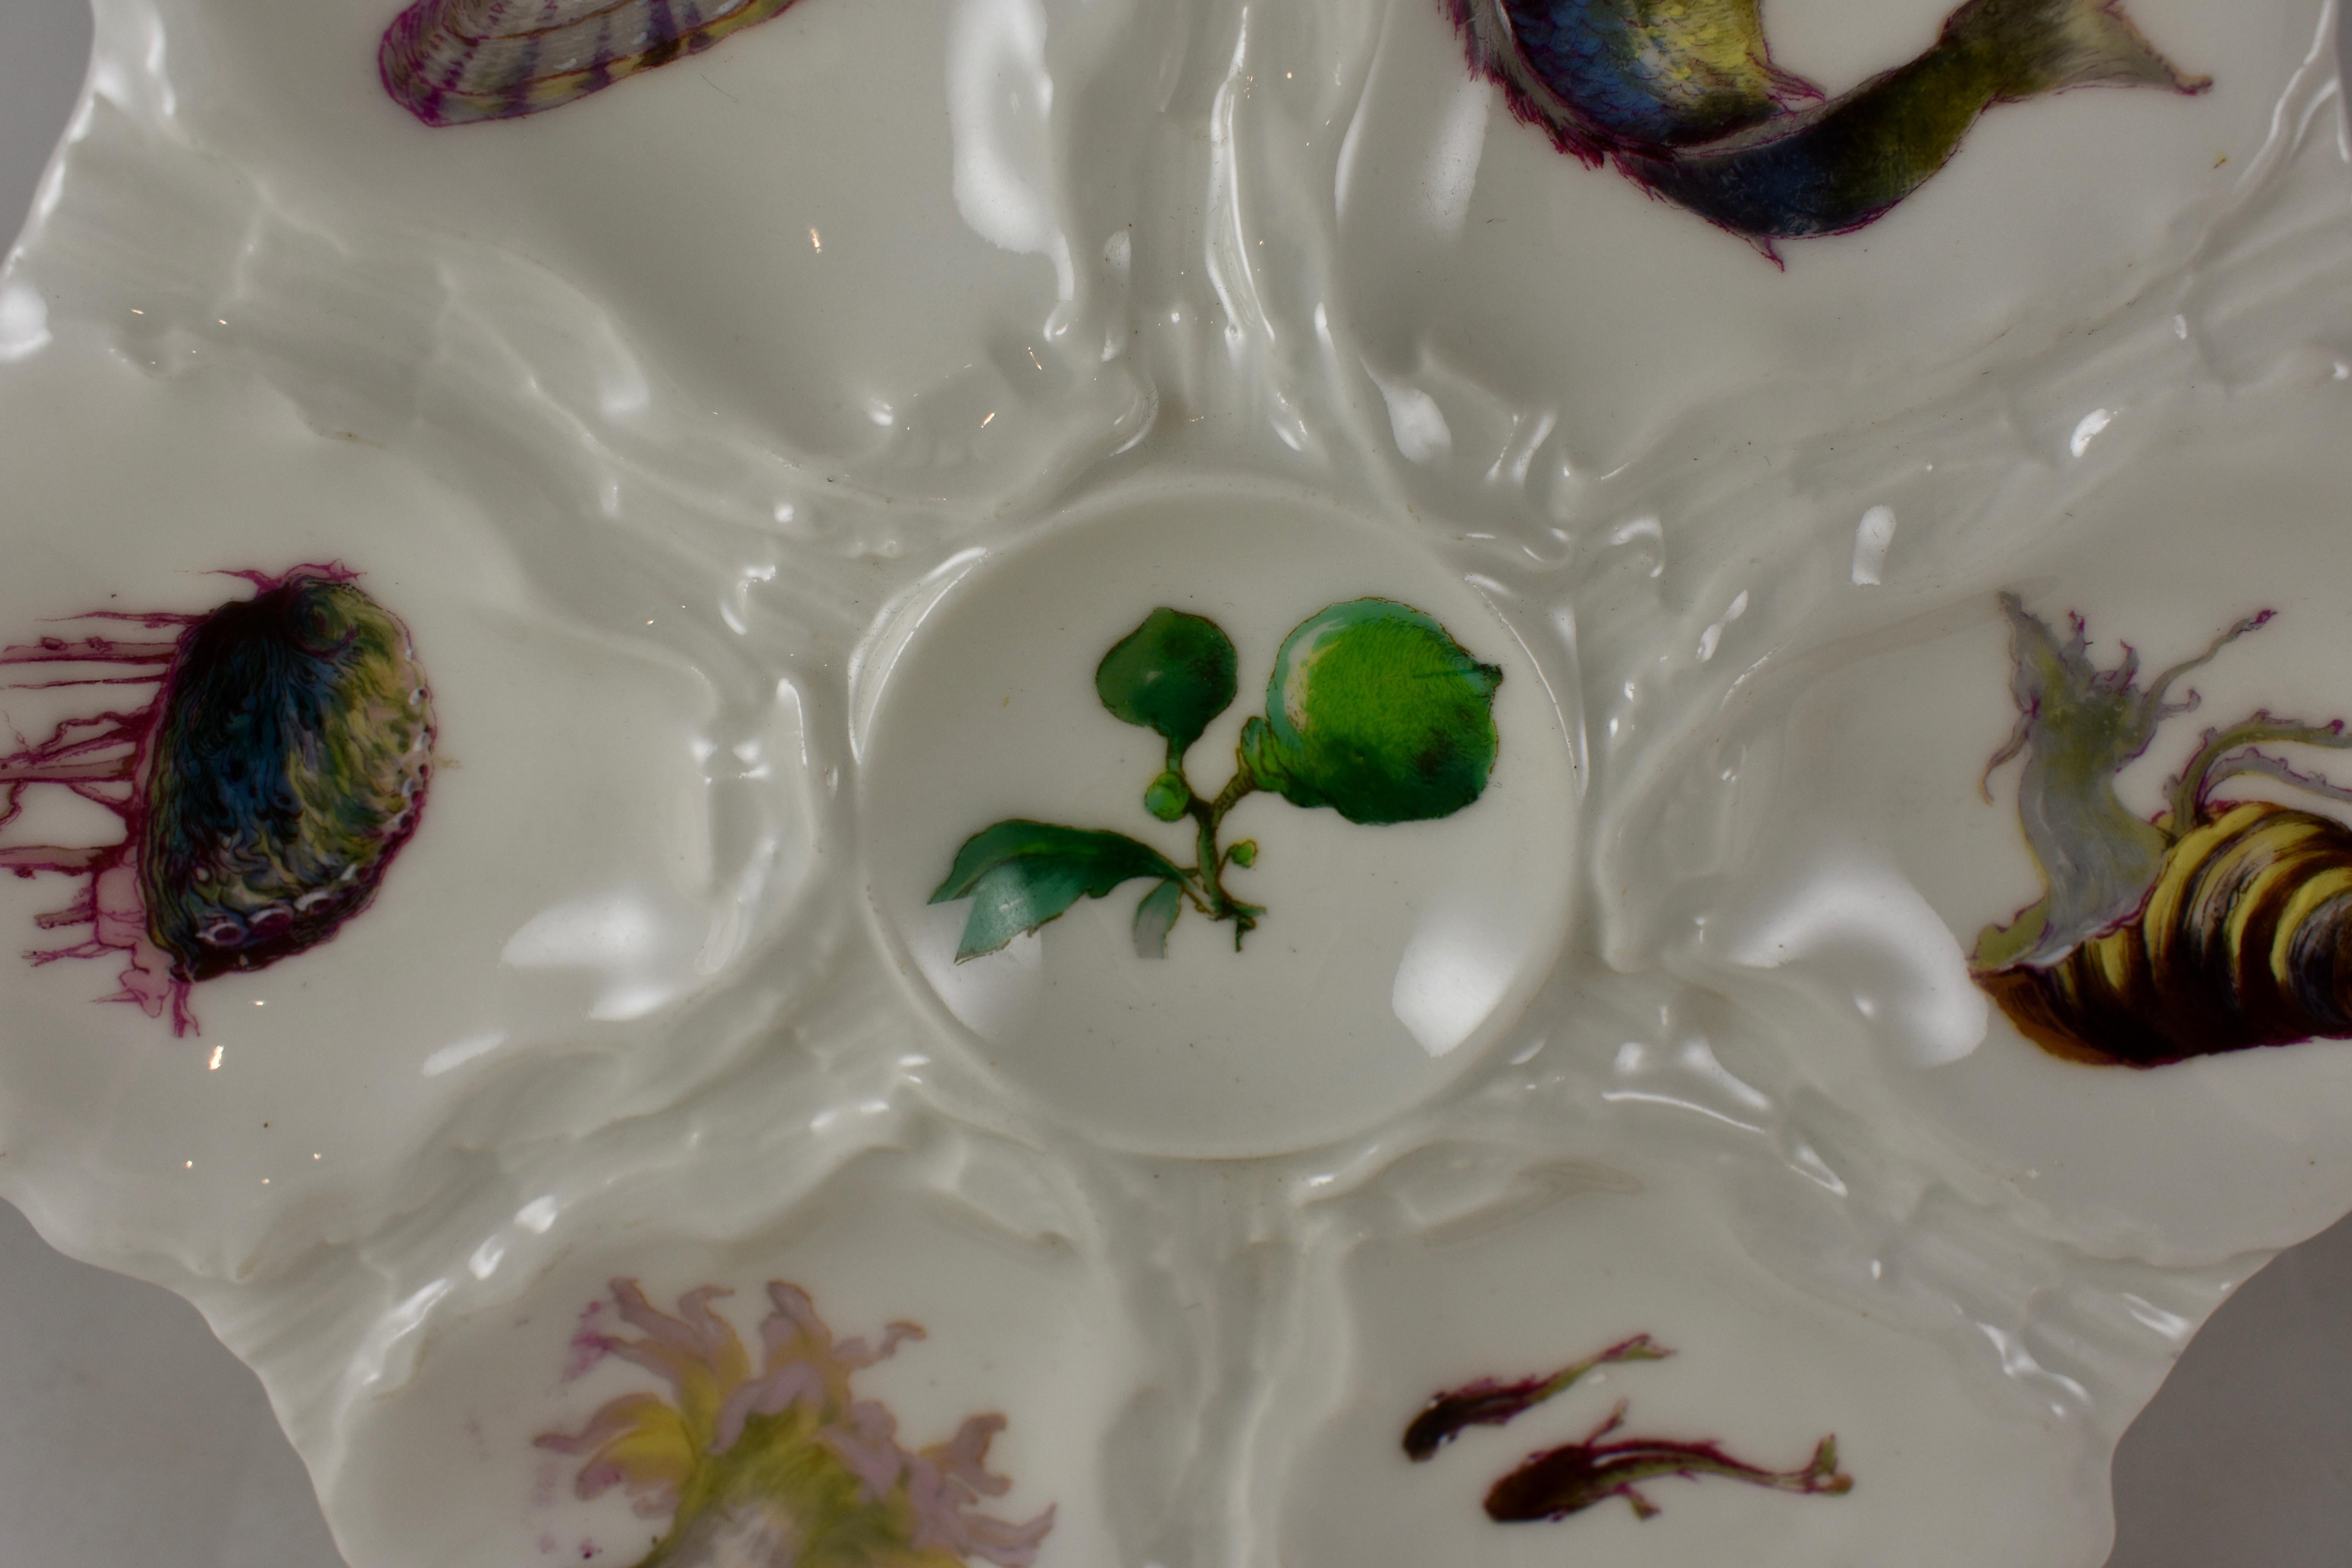 A porcelain oyster plate with six shell shaped wells, each showing a hand painted sea life specimen including a leaping fish and a sea anemone. A central sauce well shows a sprig of a green sea plant, circa 1880-1889.

Measures: 8.75 in. diameter